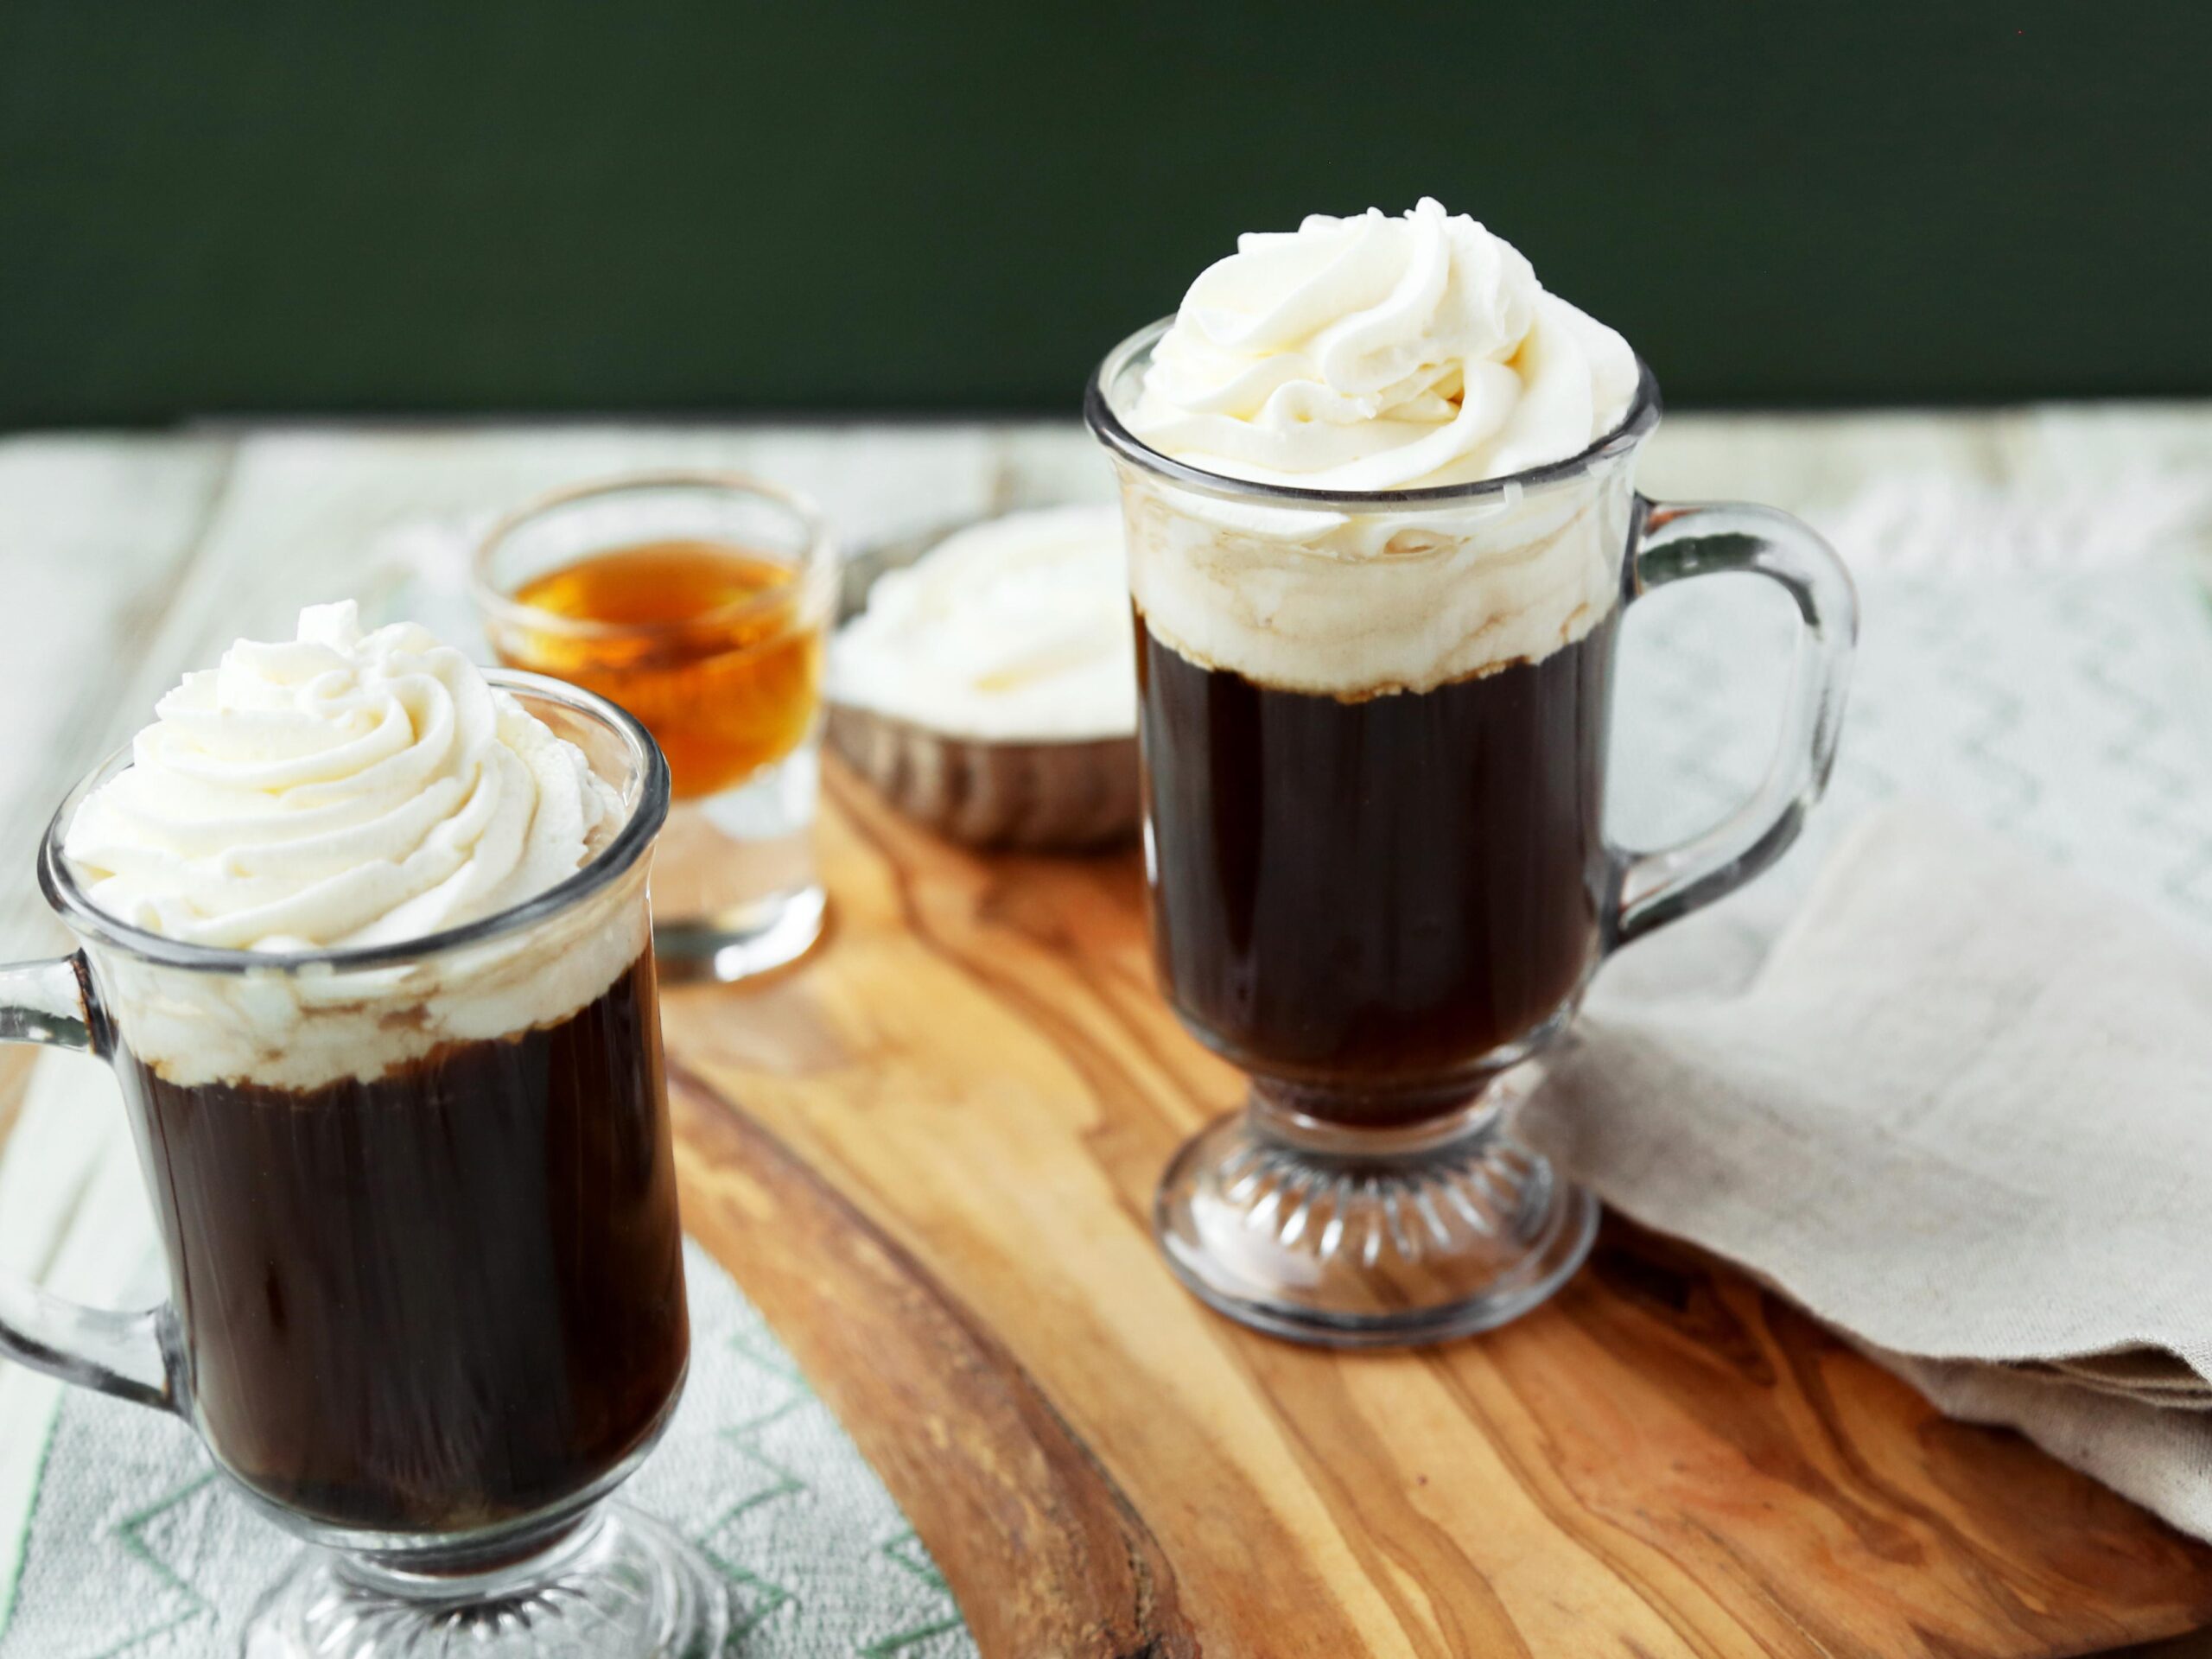  A simple but satisfying recipe that's perfect for coffee and whiskey lovers alike.